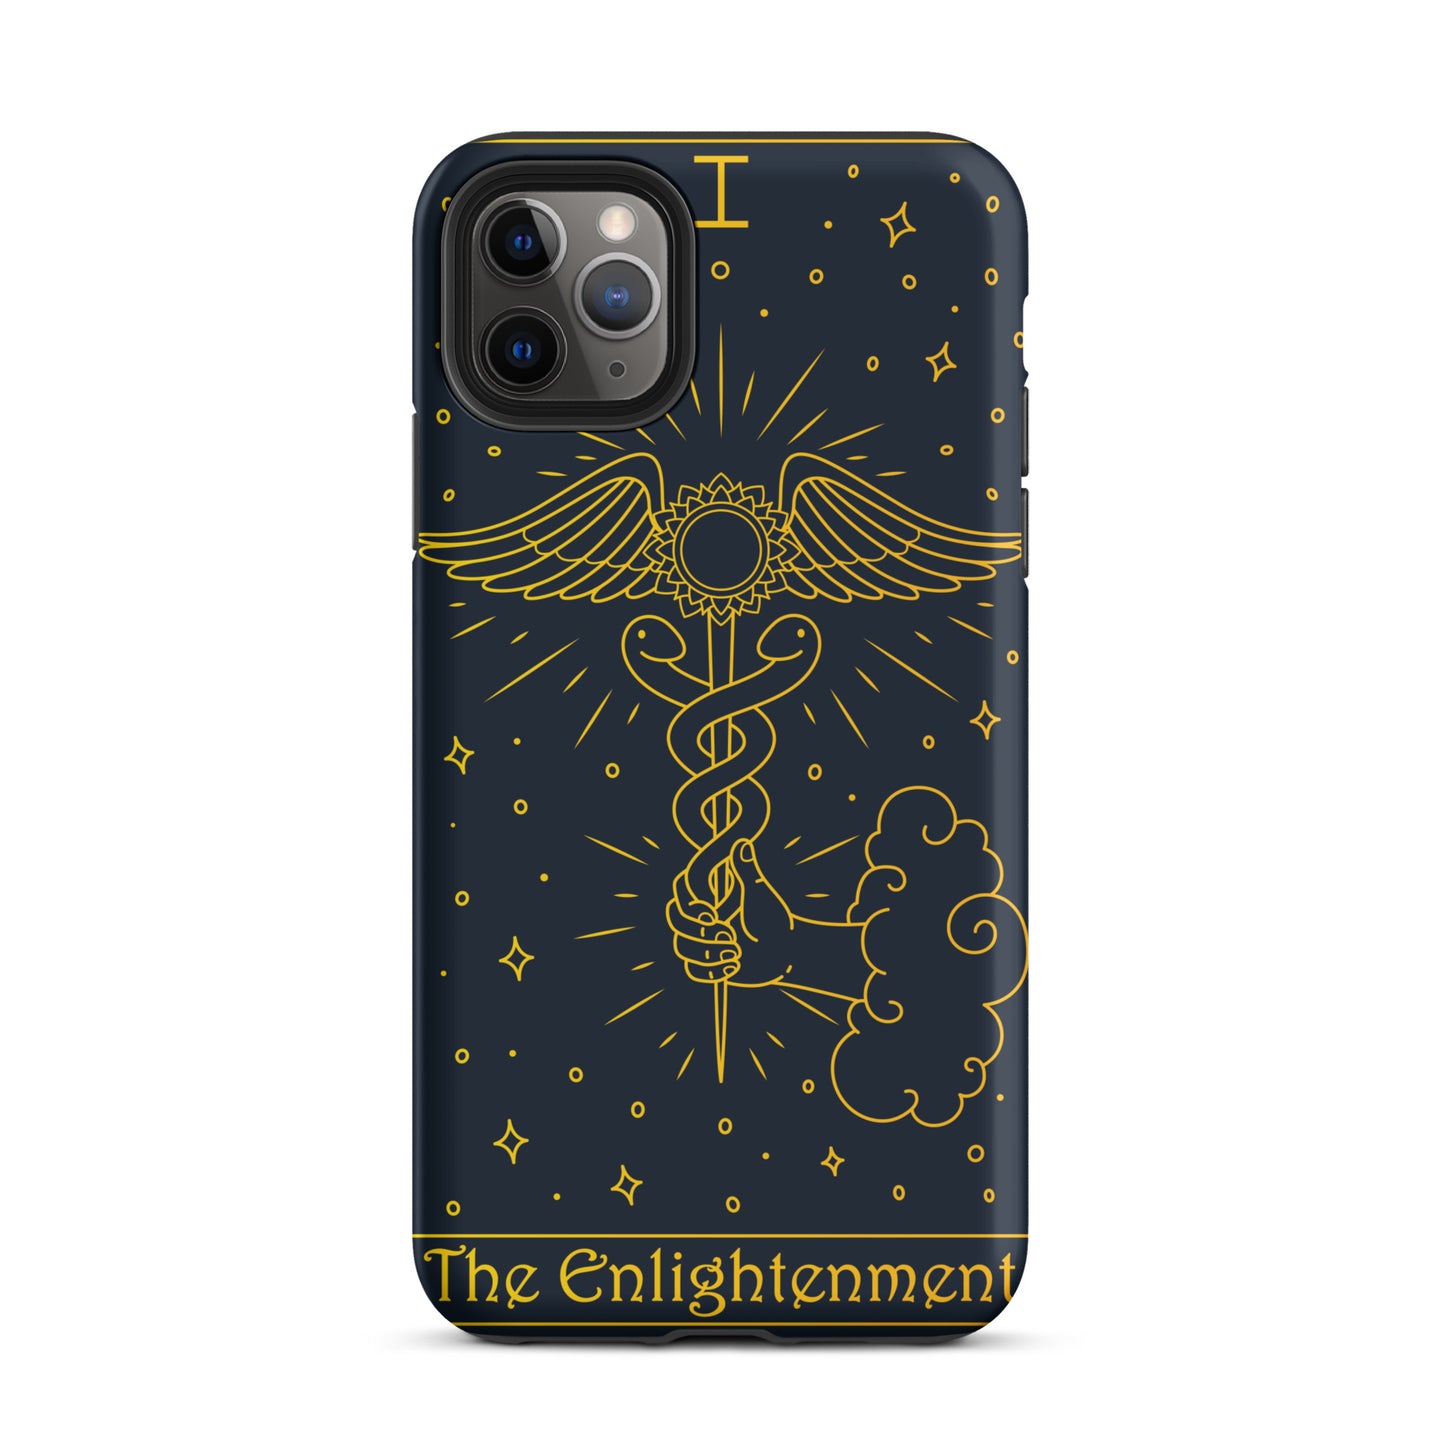 'The Enlightenment' Tarot Card Durable, Anti-Shock iPhone Case | Ace of Wands Rendition